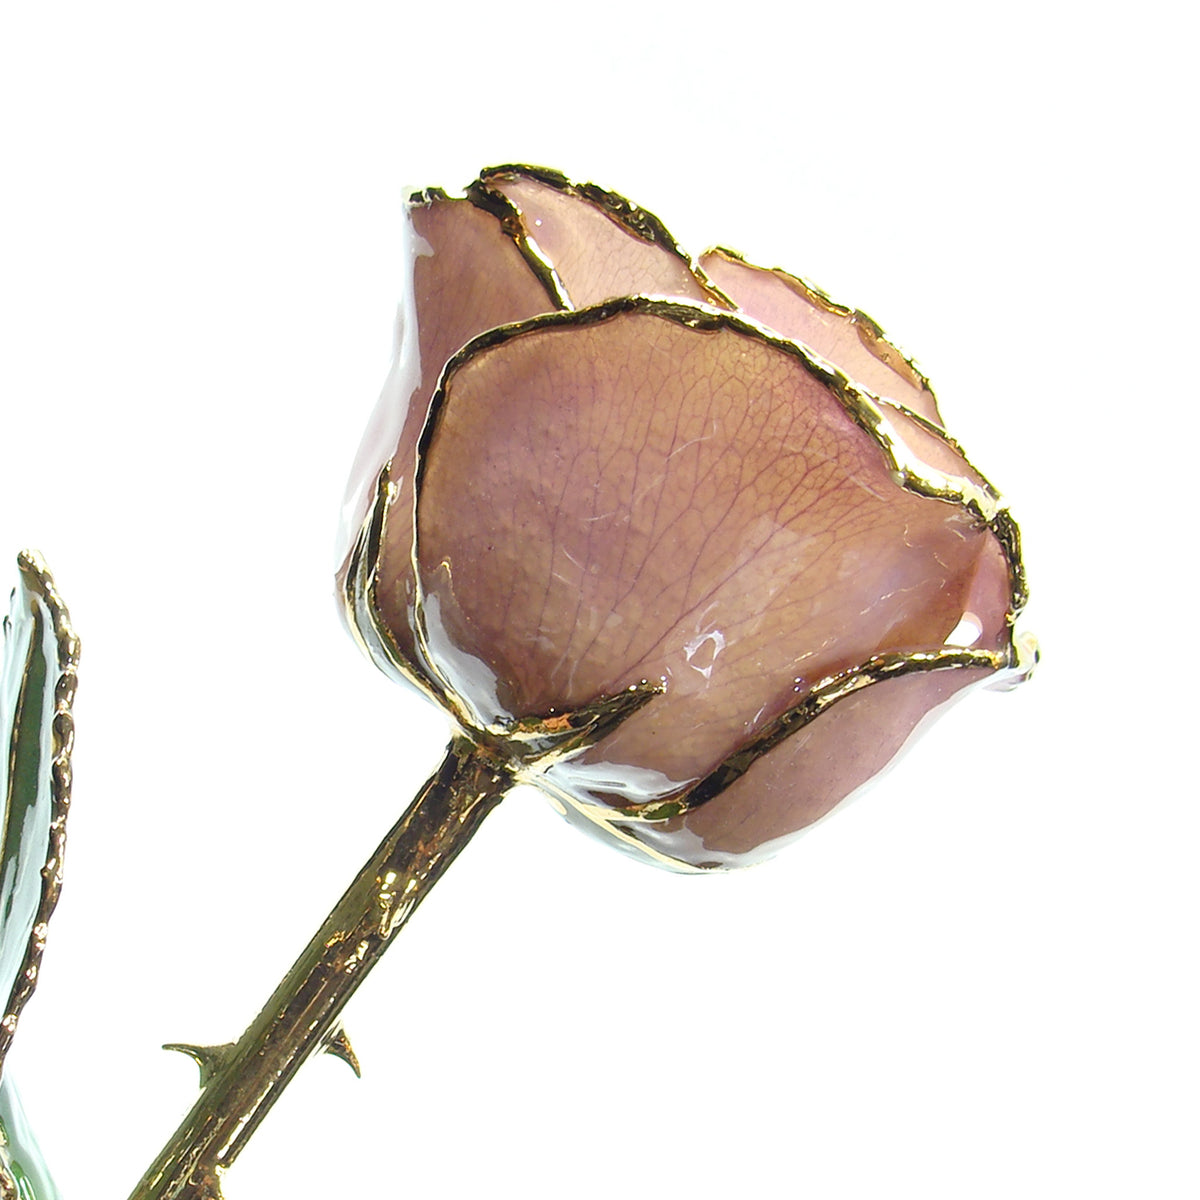 24K Gold Trimmed Forever Rose with Lavender Petals which are a light pink or purple color. View of Stem, Leaves, and Rose Petals and Showing Detail of Gold Trim